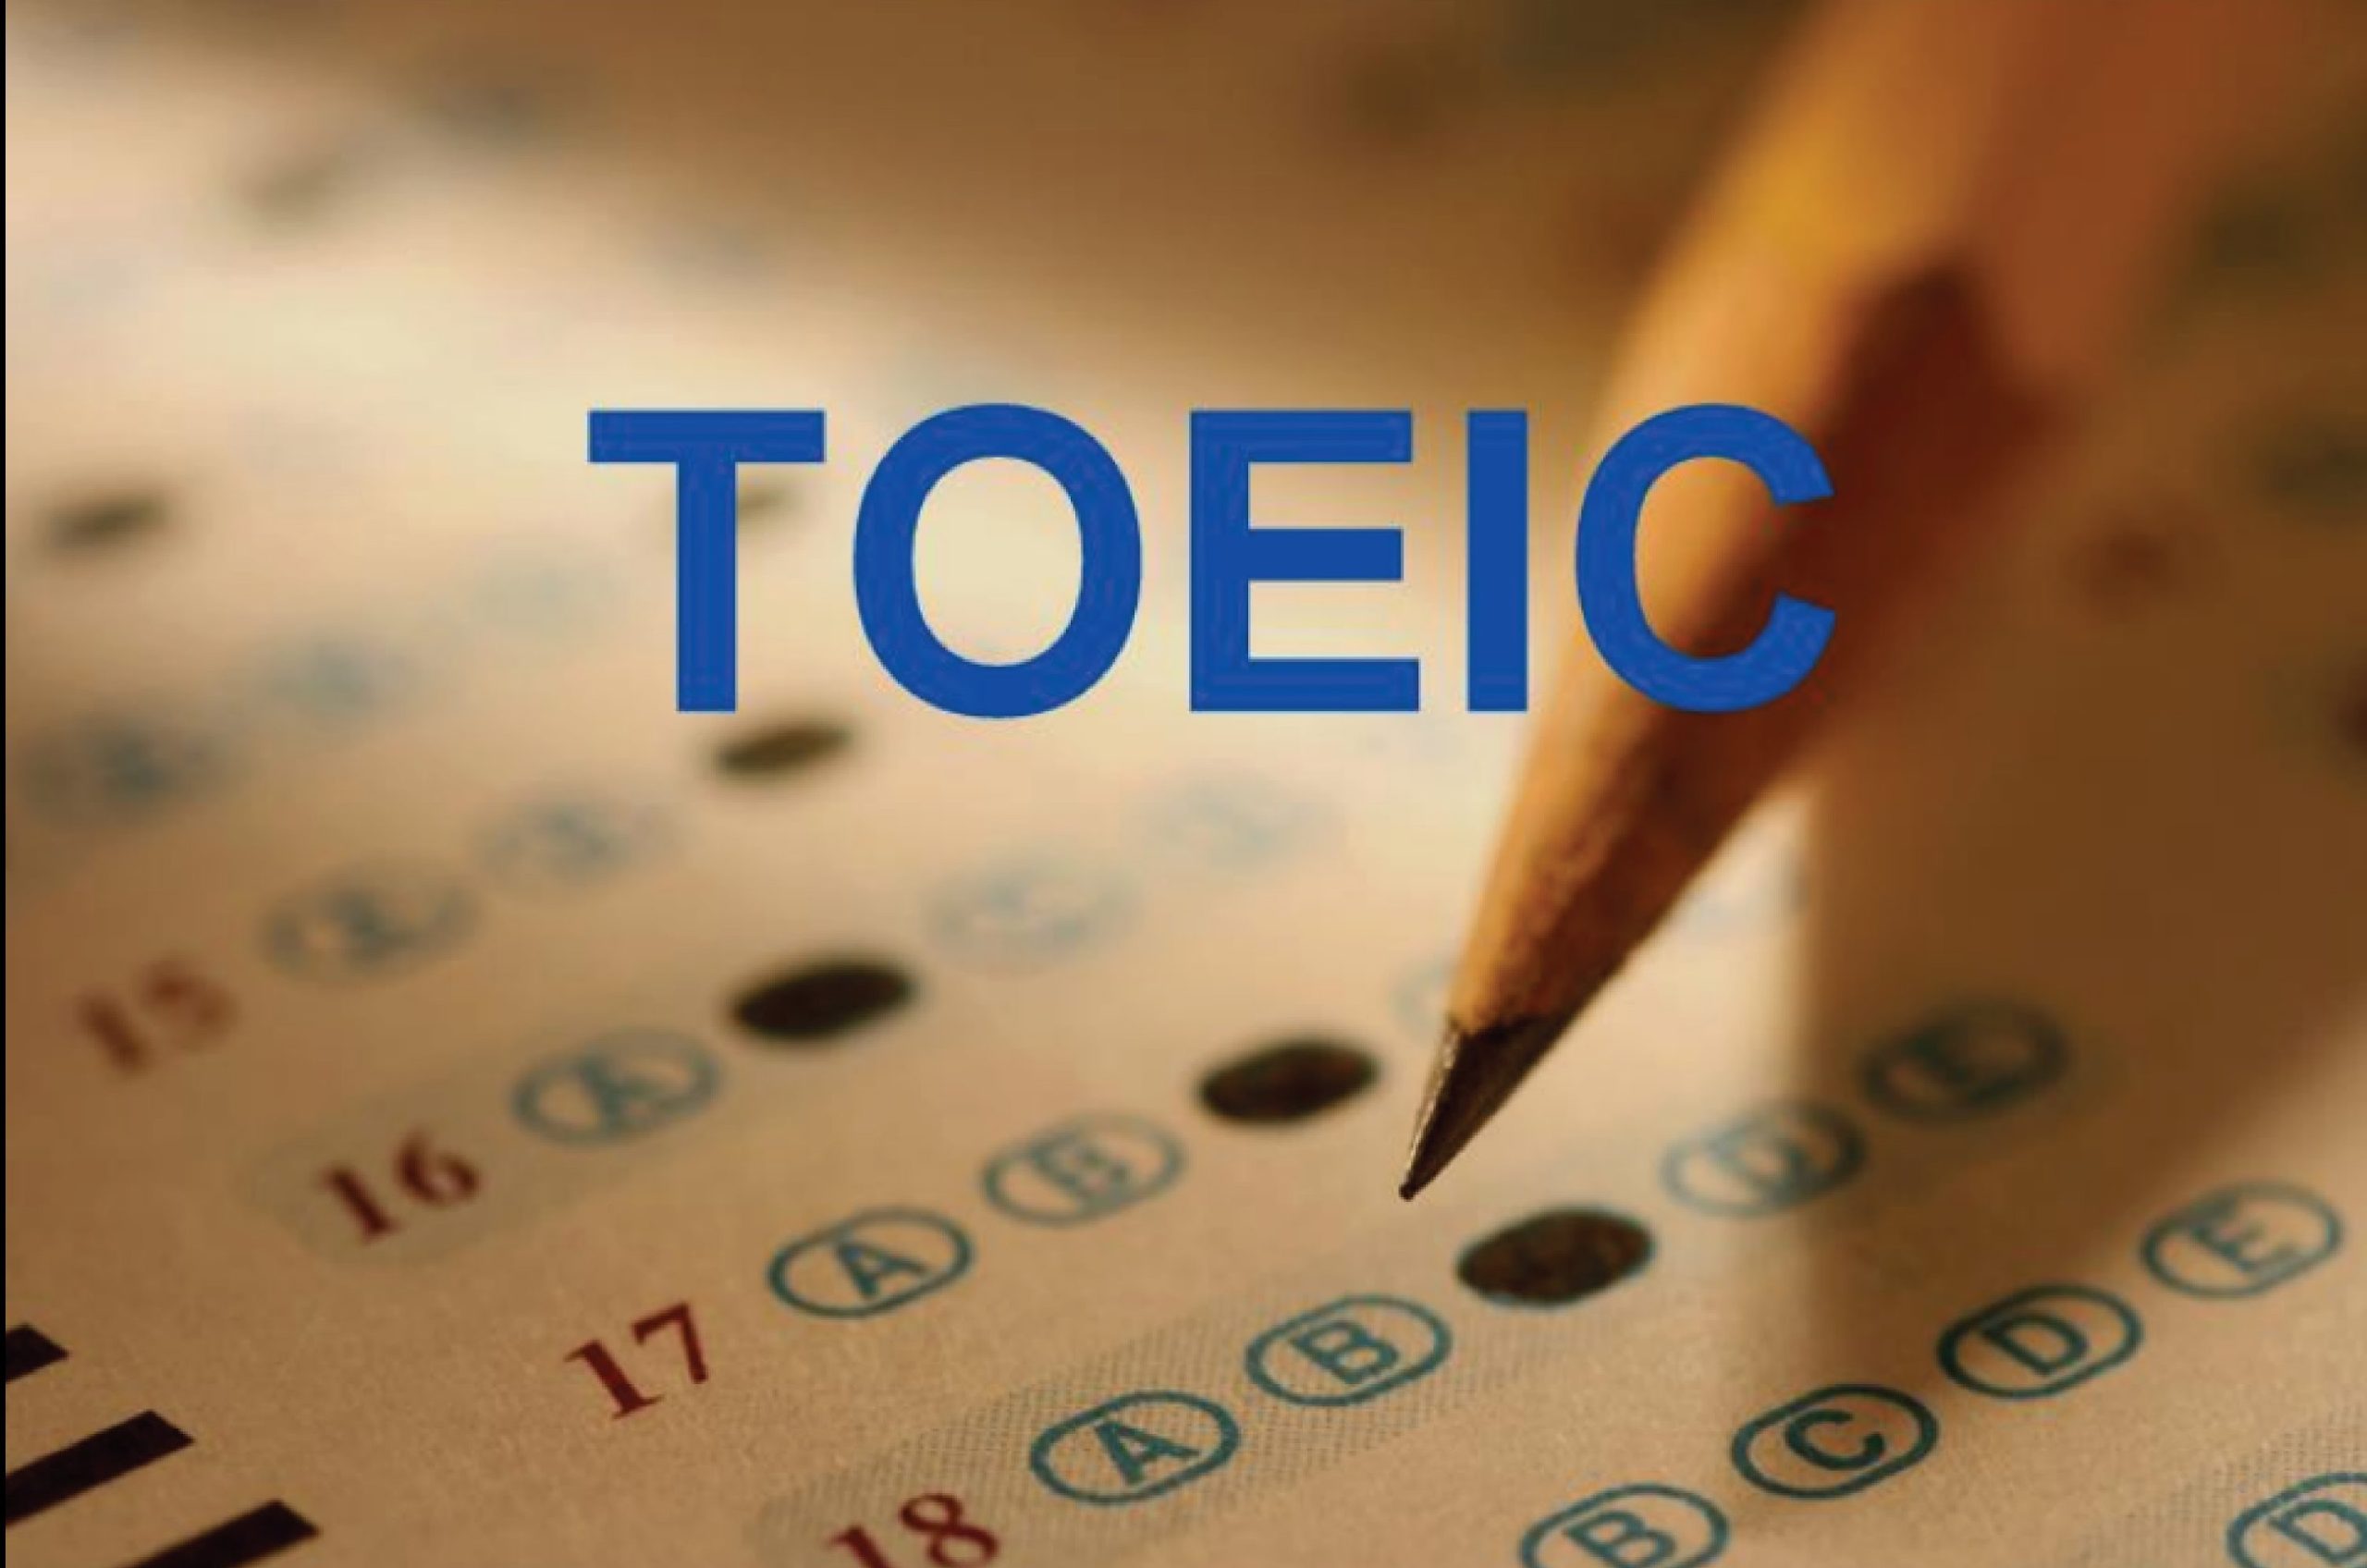 trung tam hoc toeic binh duong scaled